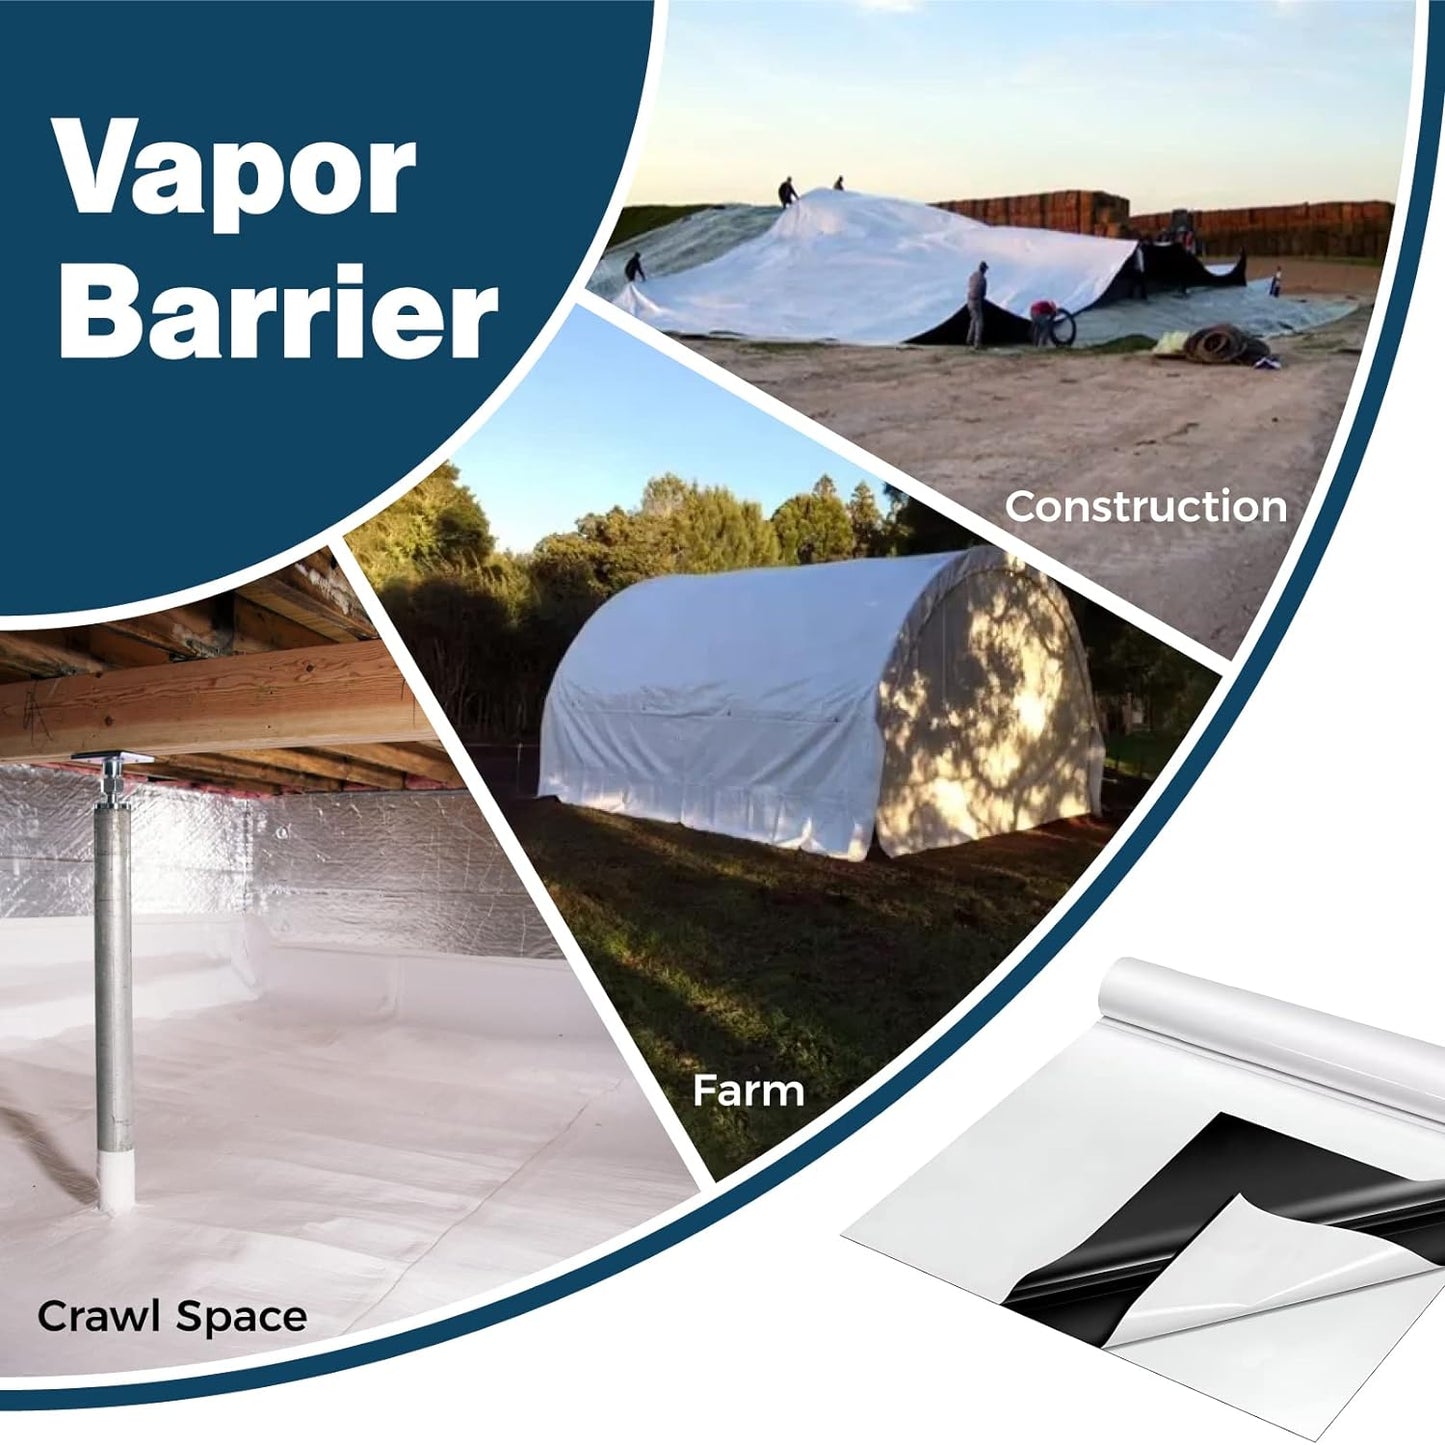 Install vapor barrier in crawl space